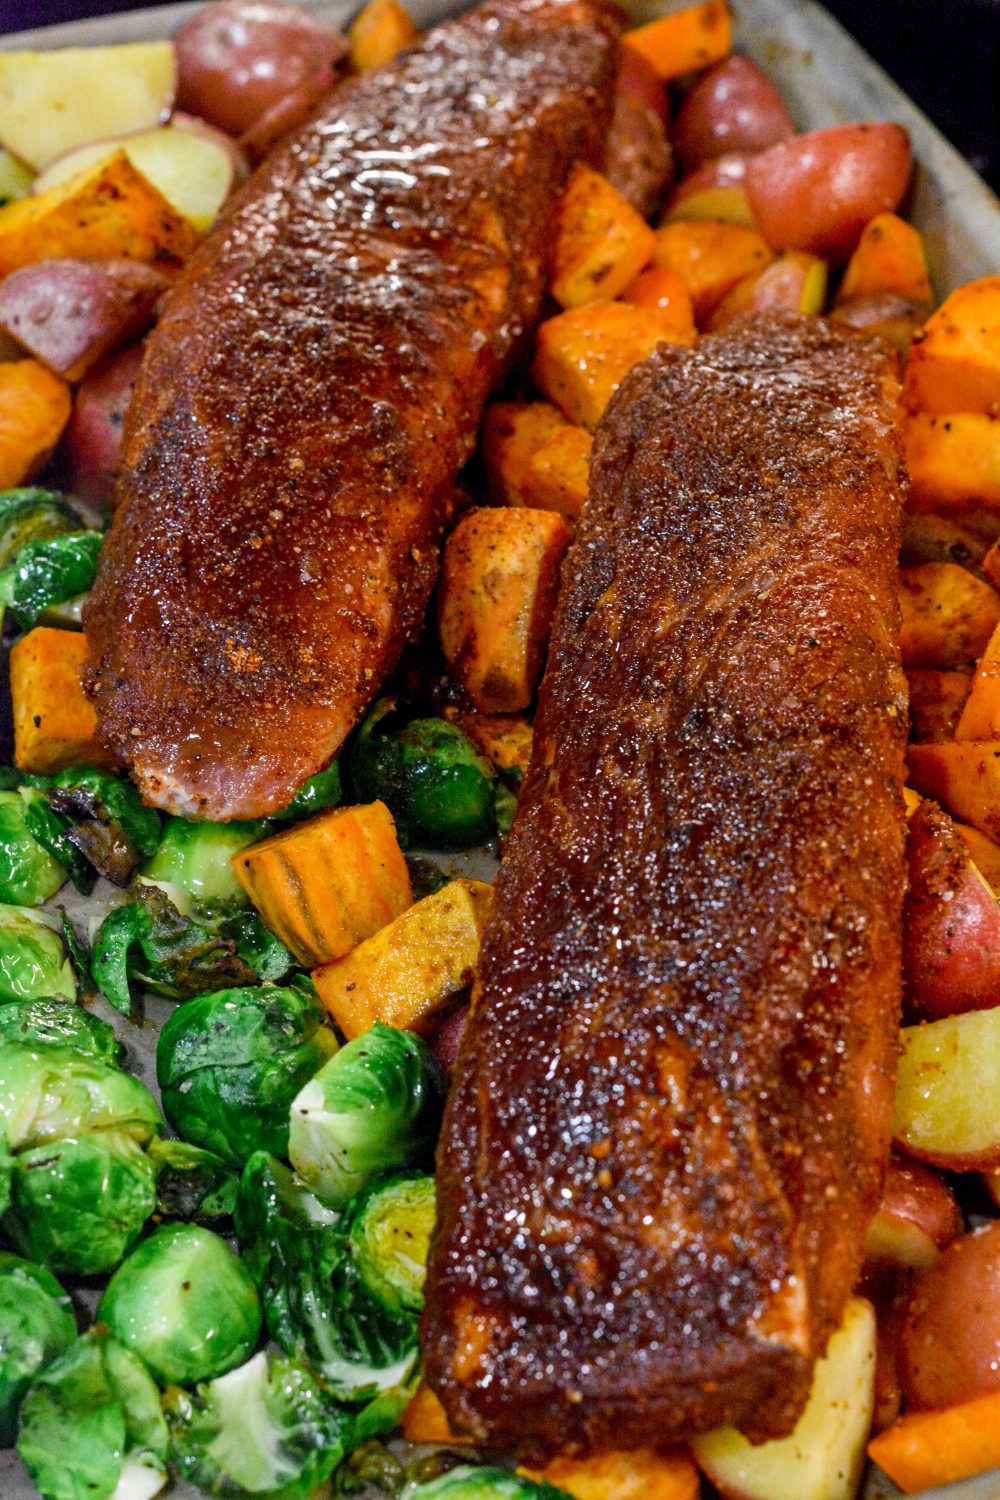 The sheet pan pork tenderloin is rubbed in a sweet and spicy dry rub that is sprinkled on the cut-up sweet potatoes, red potatoes, and Brussels sprouts before it is oven baked.